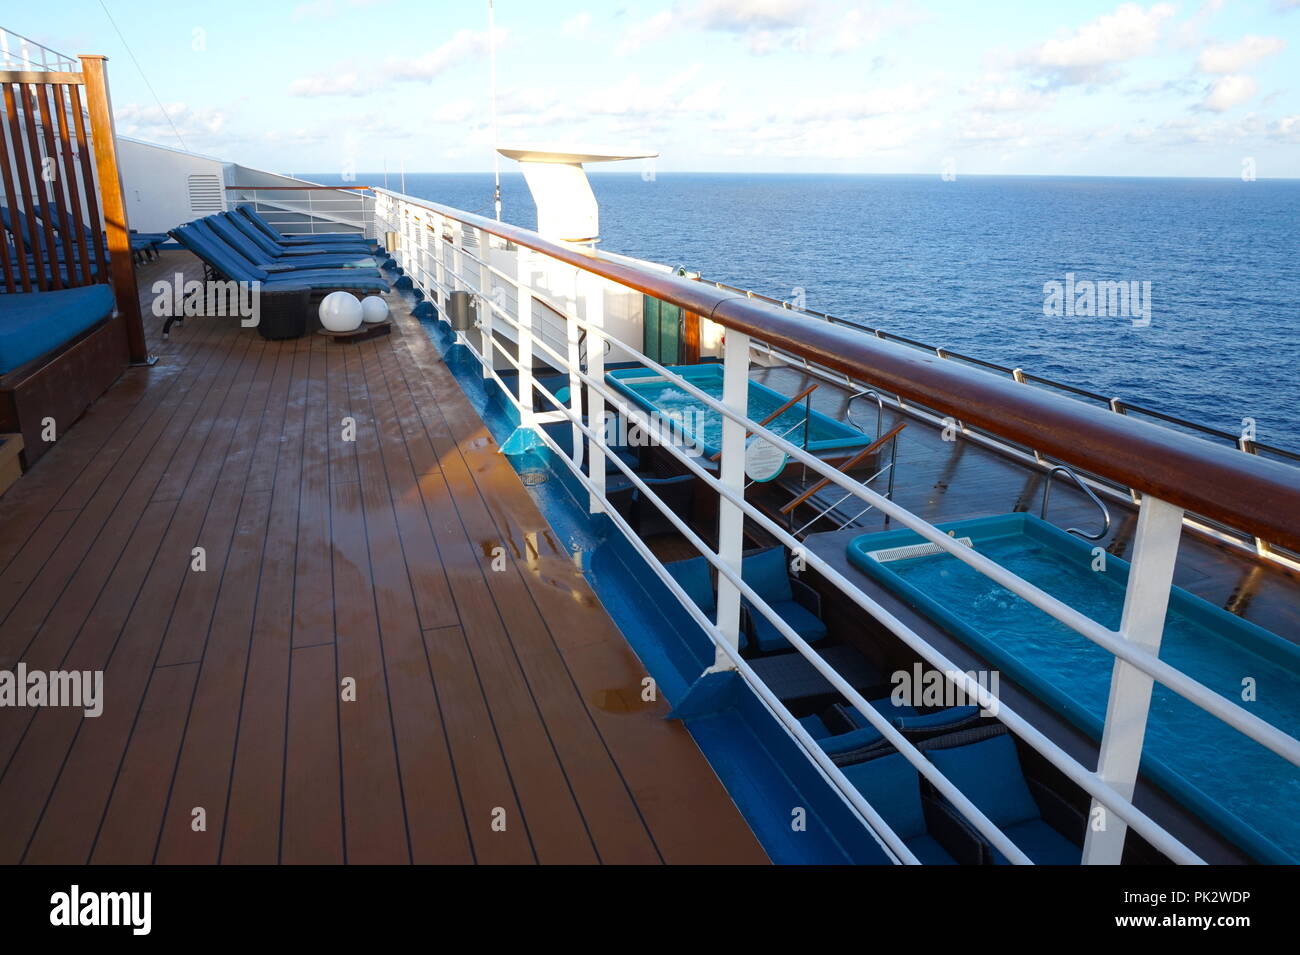 Serenity Bay on the Carnival Victory cruise ship Stock Photo